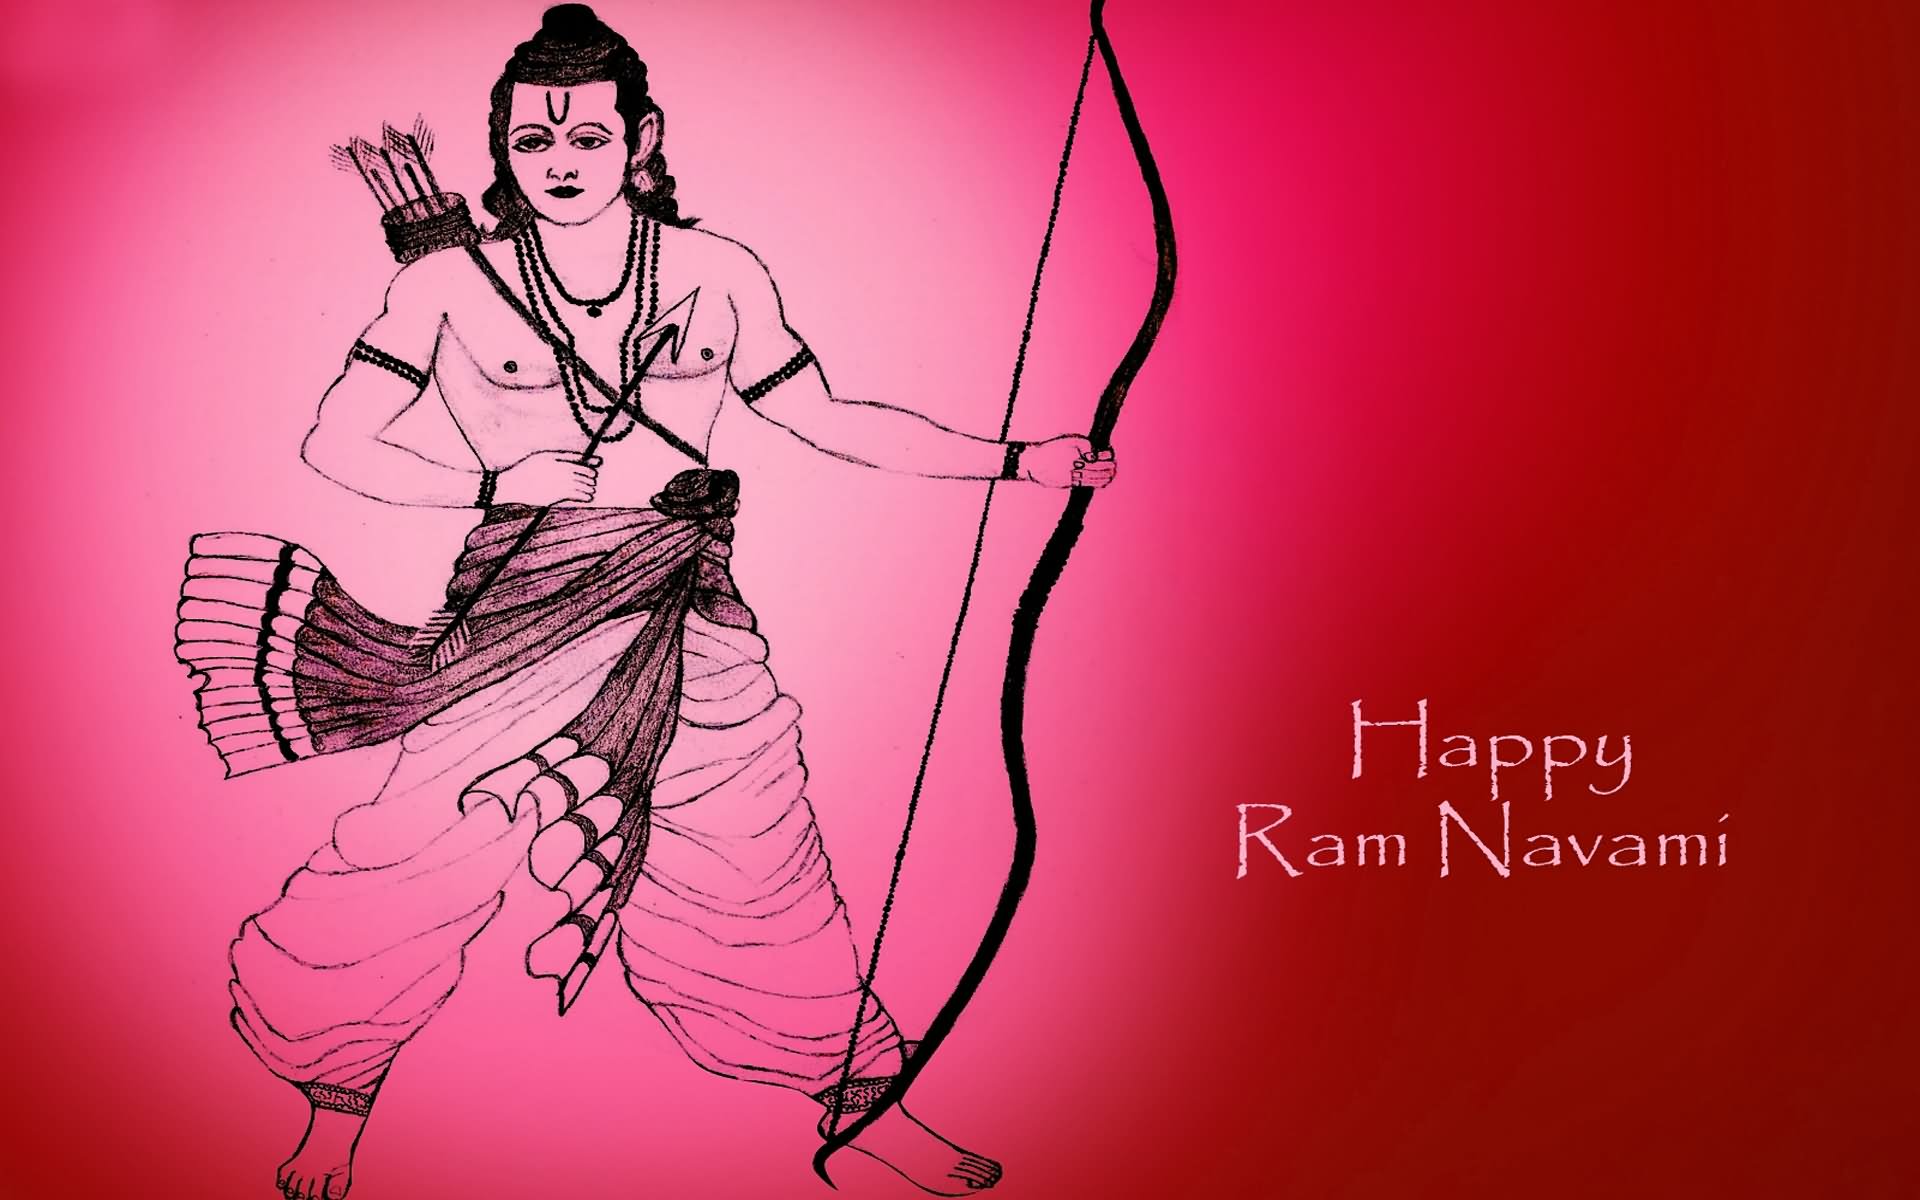 Ram Navami Light Image Hd Wallpapers And Pictures